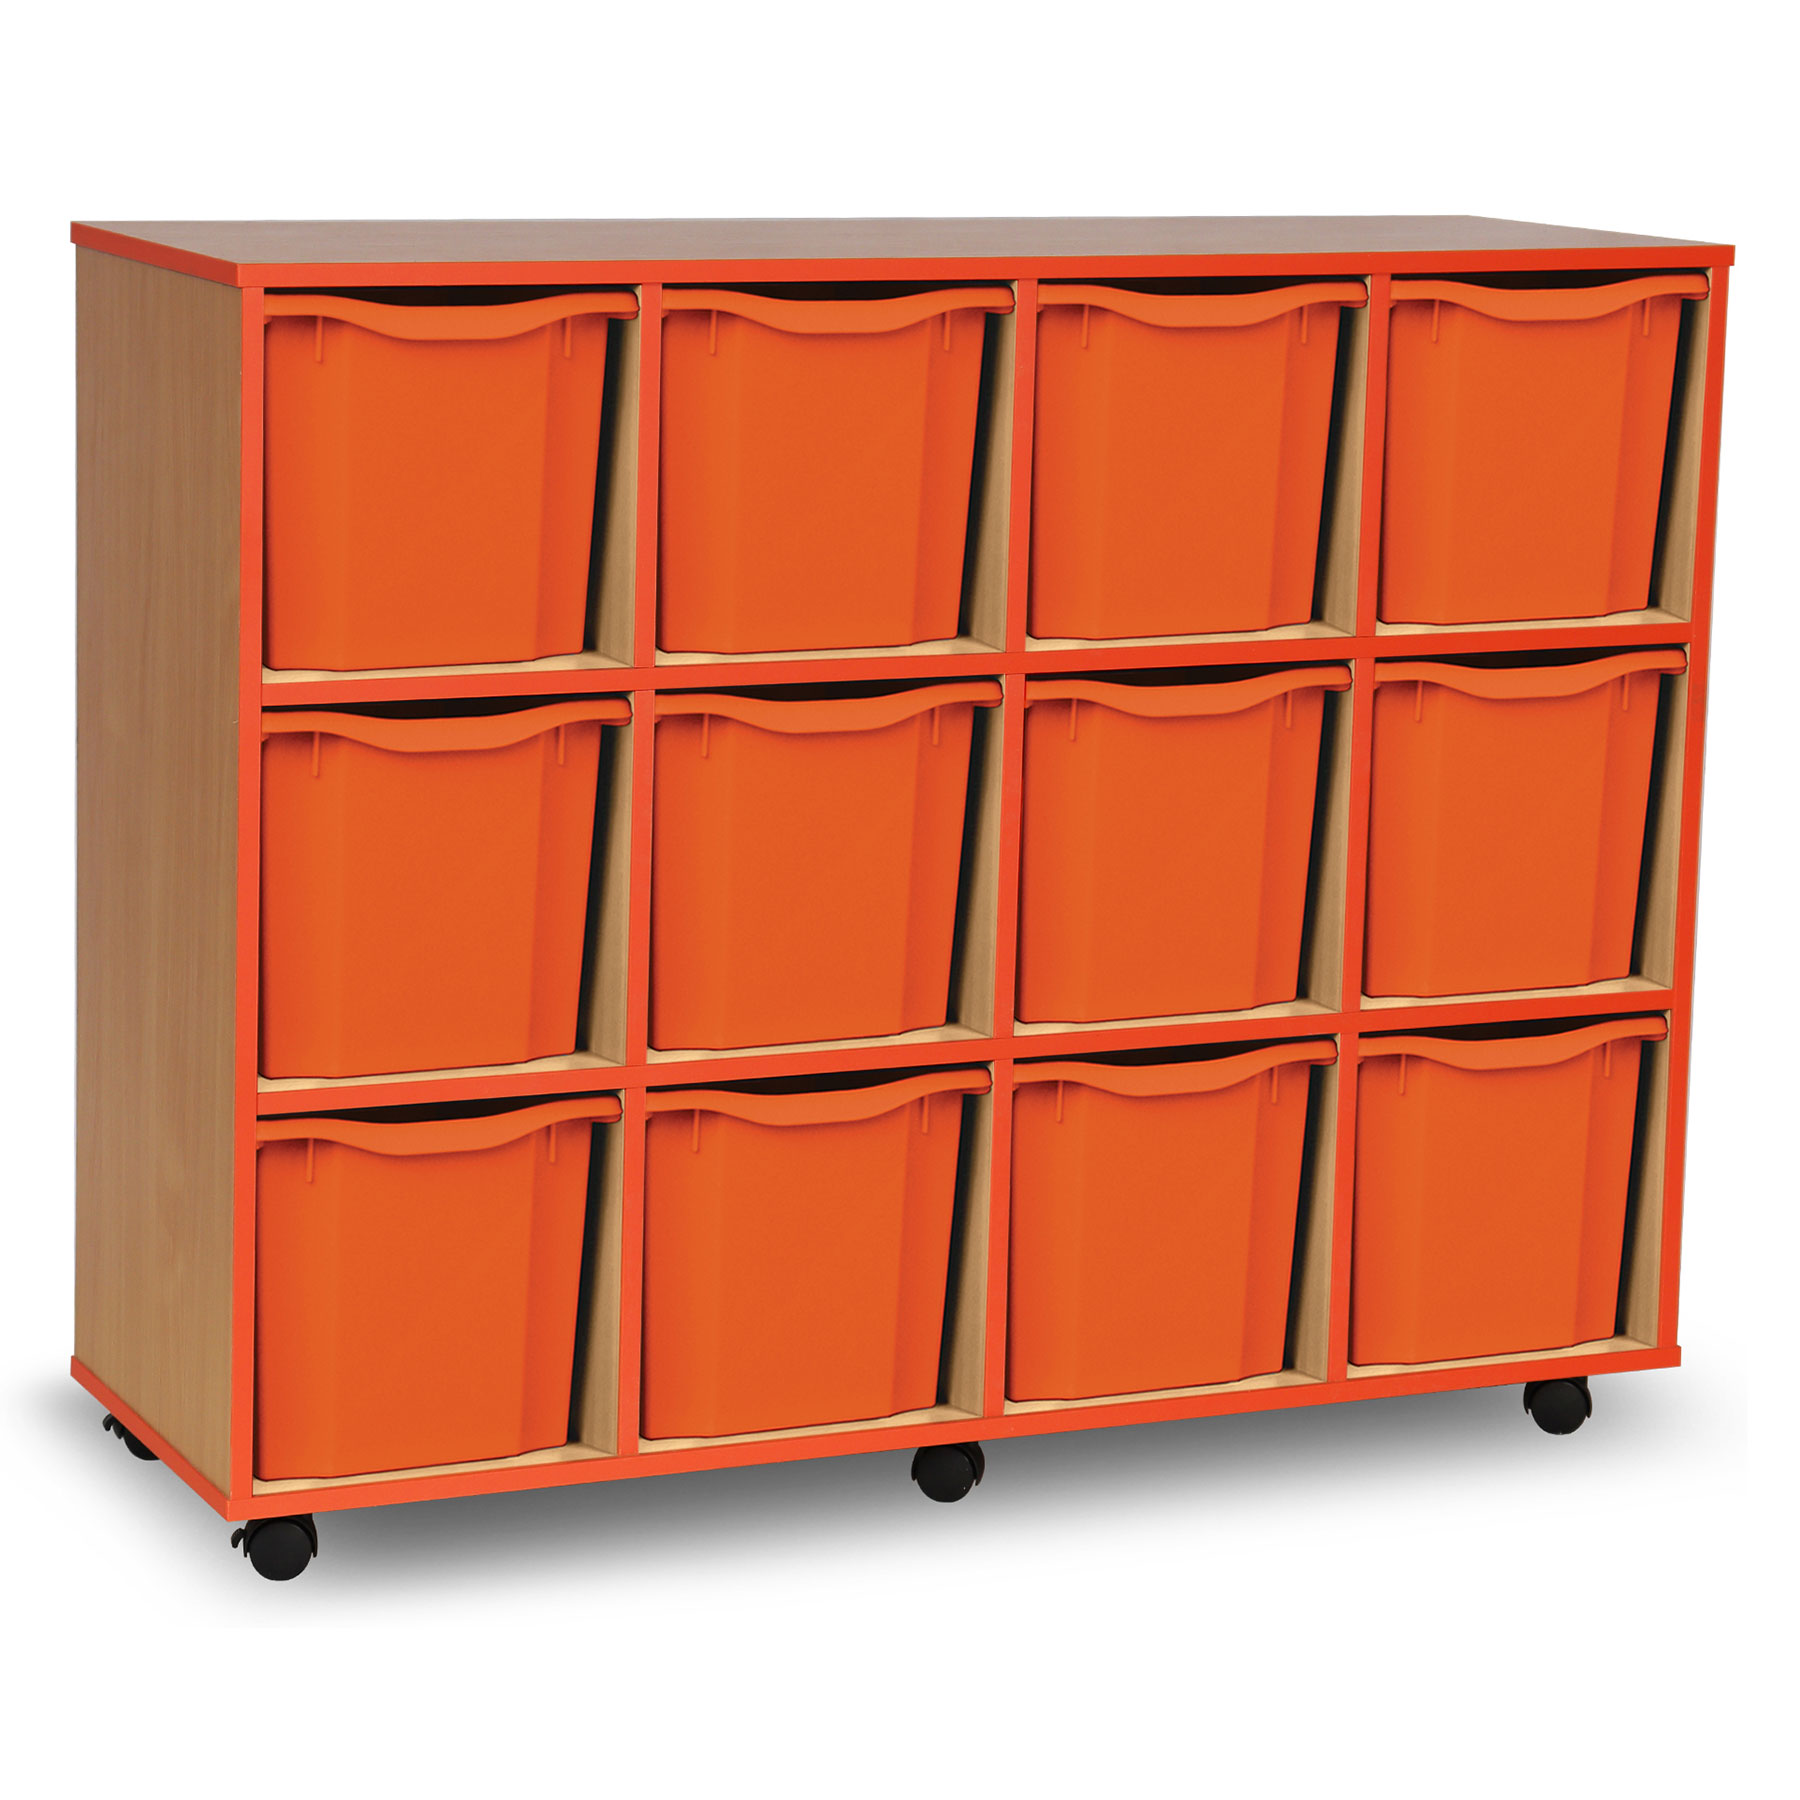 12 Quad Tray Unit Complete with Tangerine Edging, Castors and Tangerine Trays